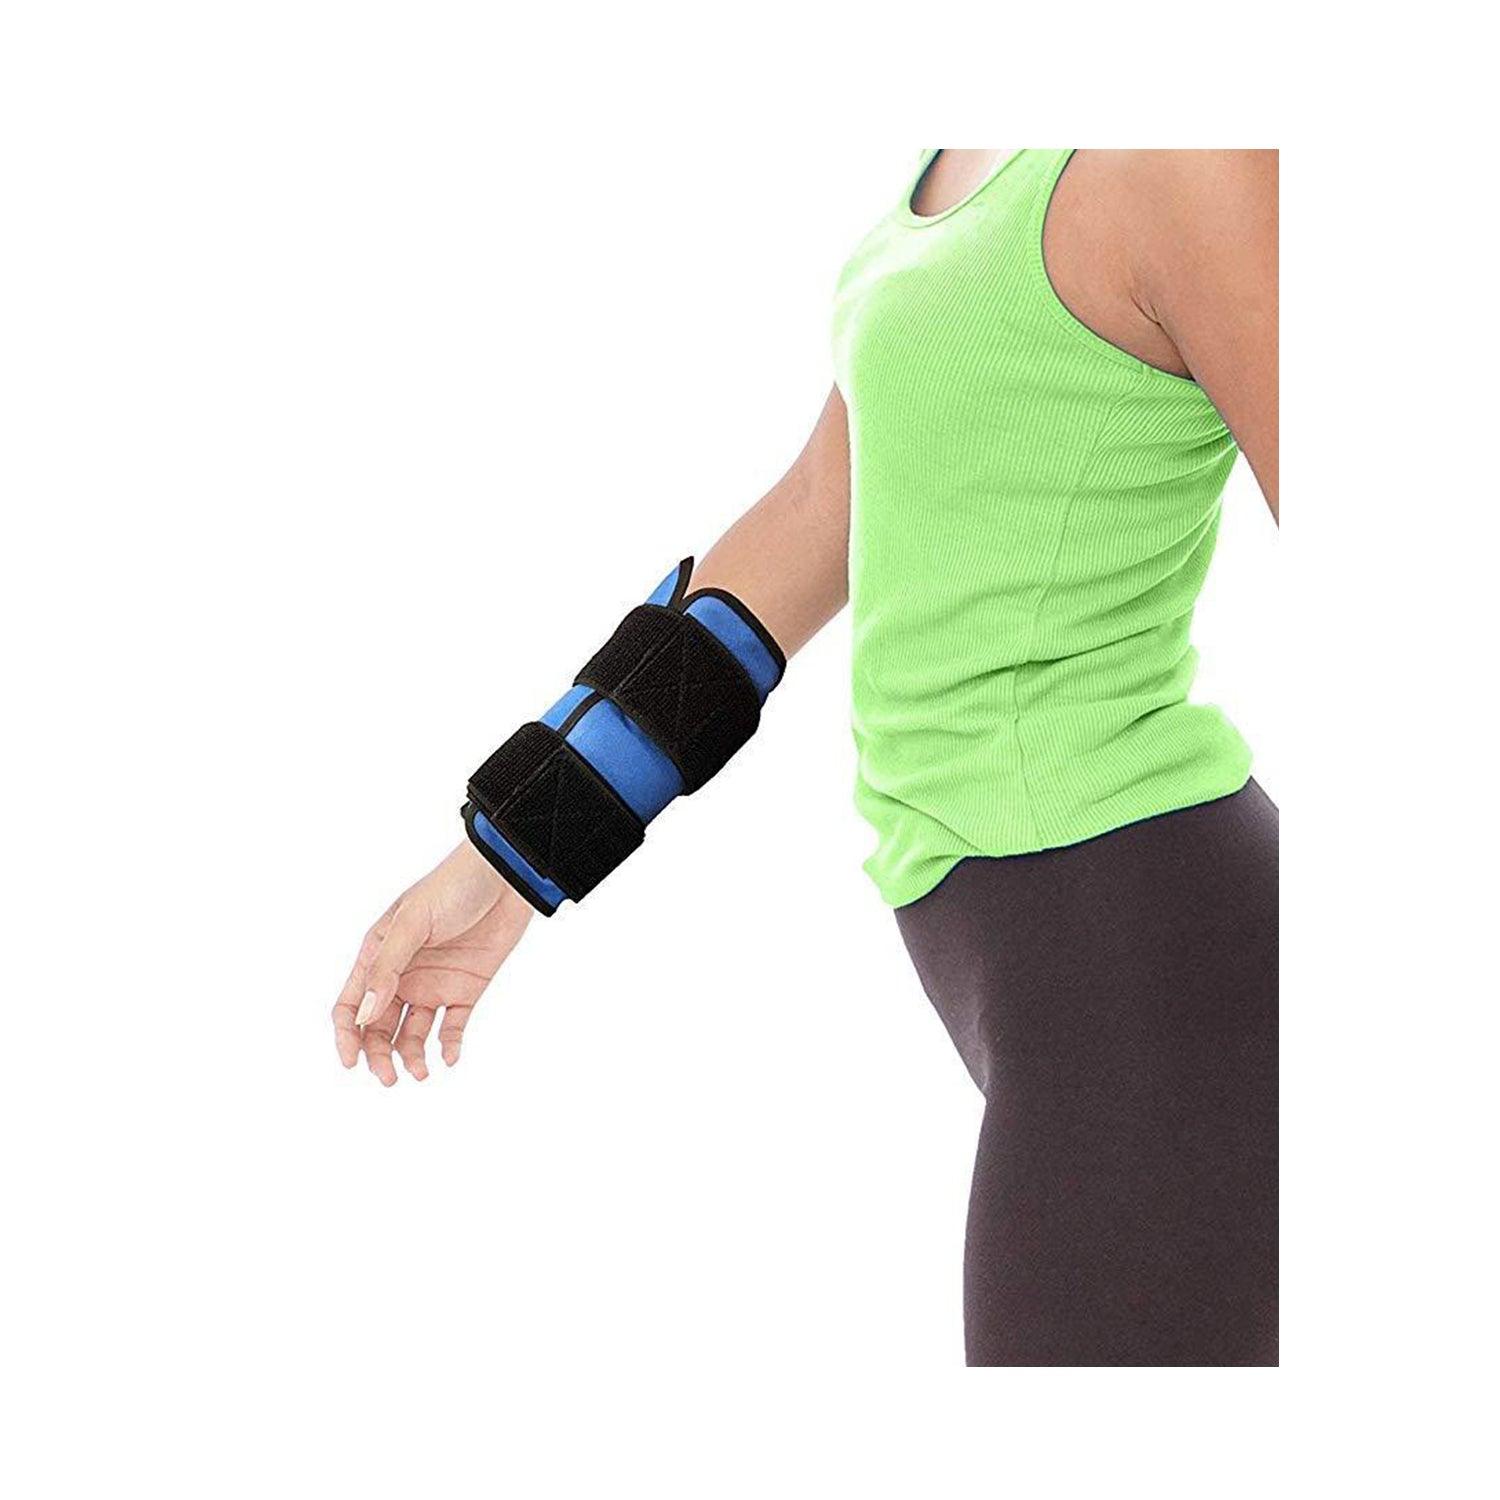 FlexiKold Gel Cold Pack with Strap on wrist